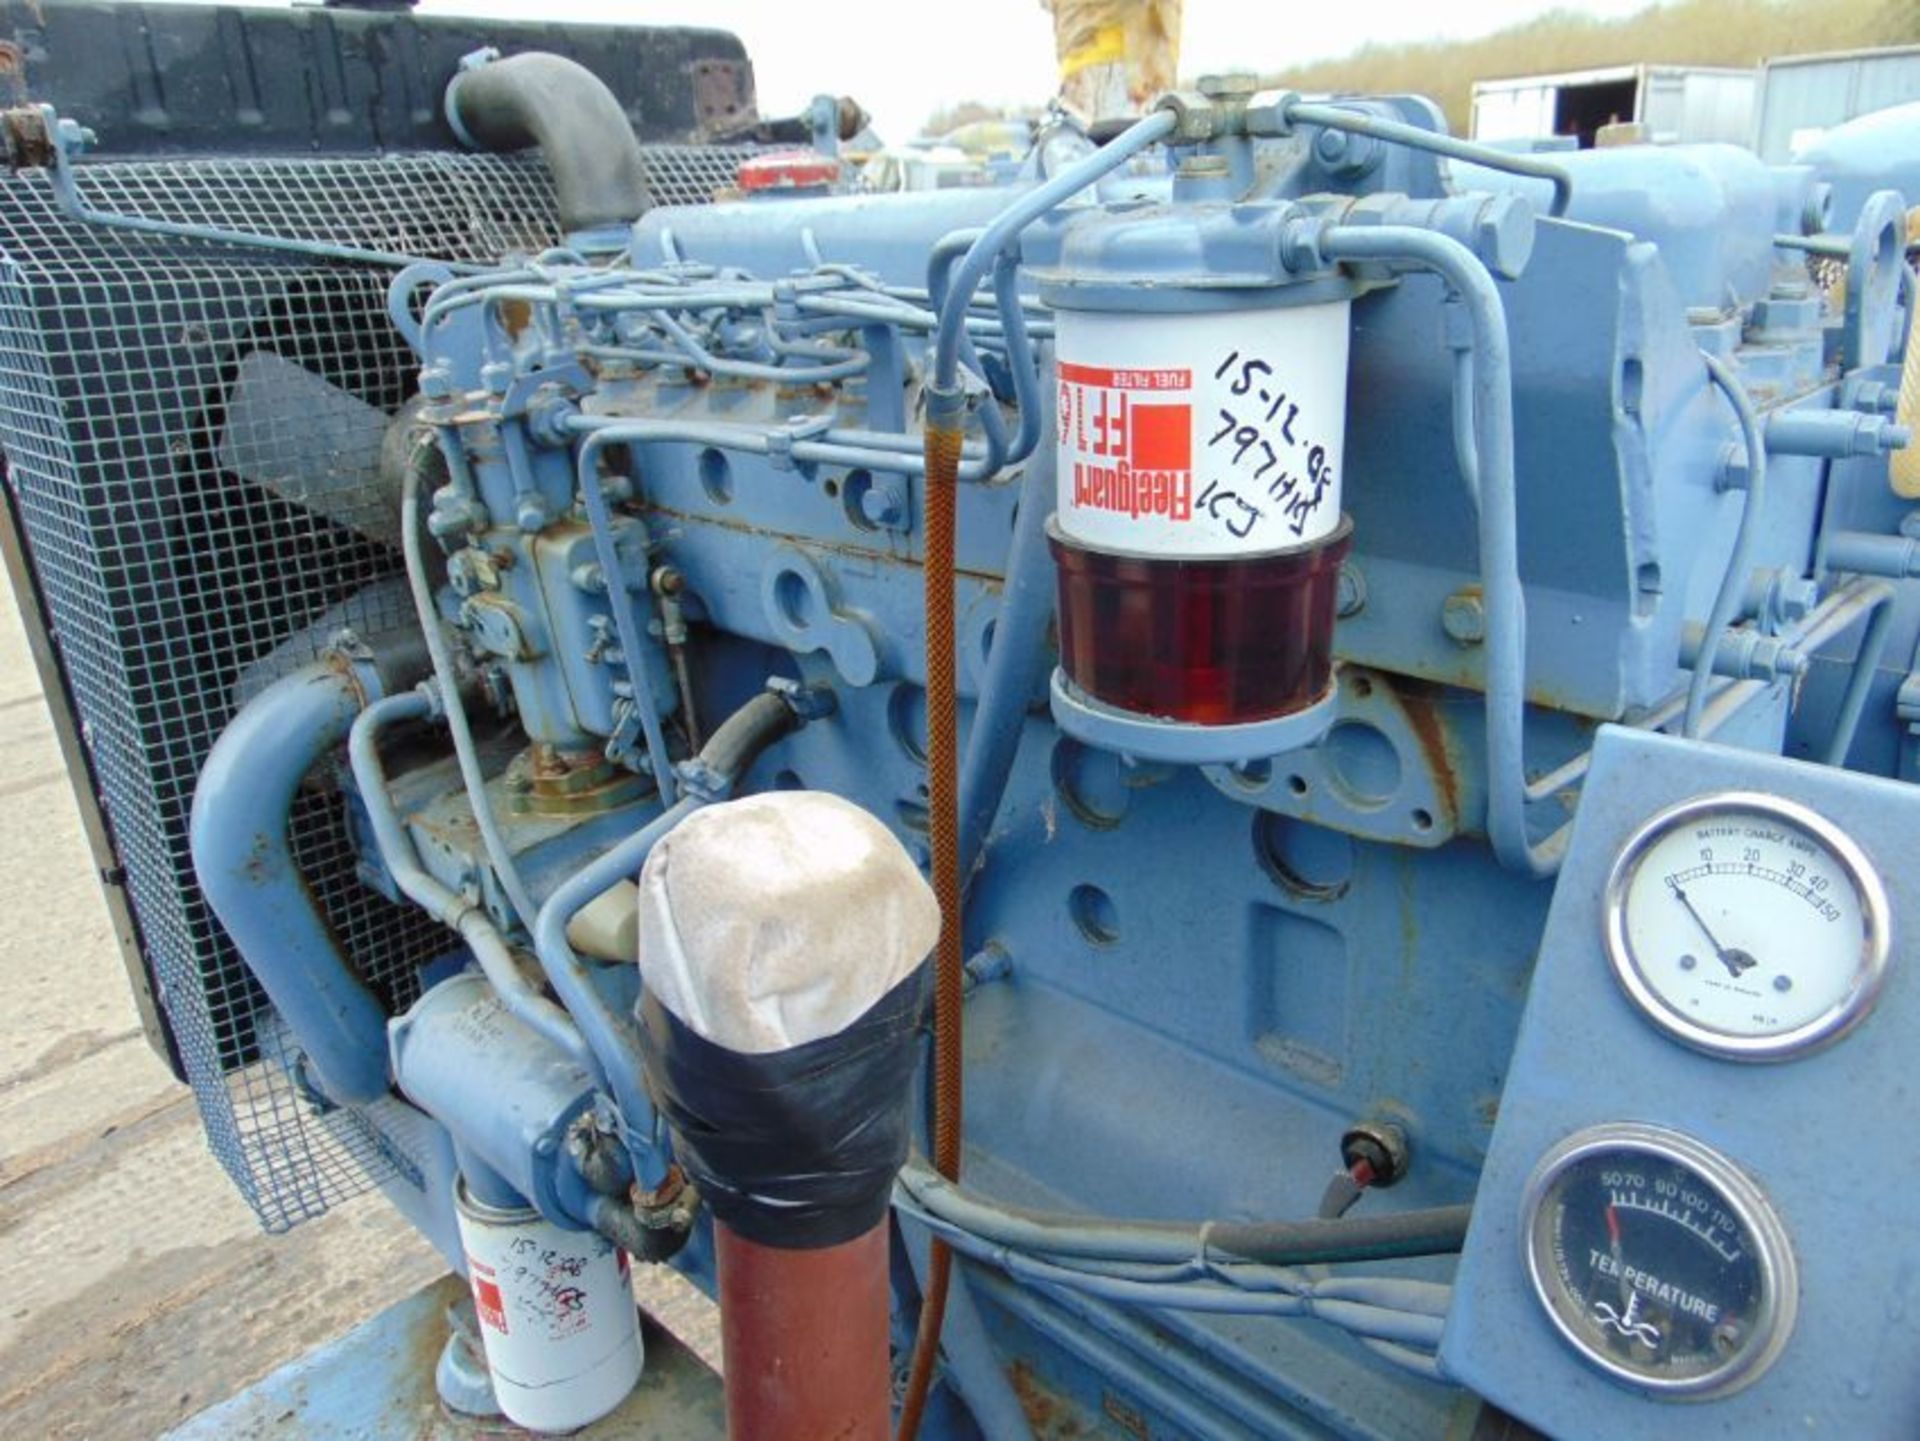 Auto Diesel 85 KVA 68 Kw 3 Phase 415/240V Standby Automatic Mains Faliure Generator ONLY 807 HOURS! - Image 10 of 20